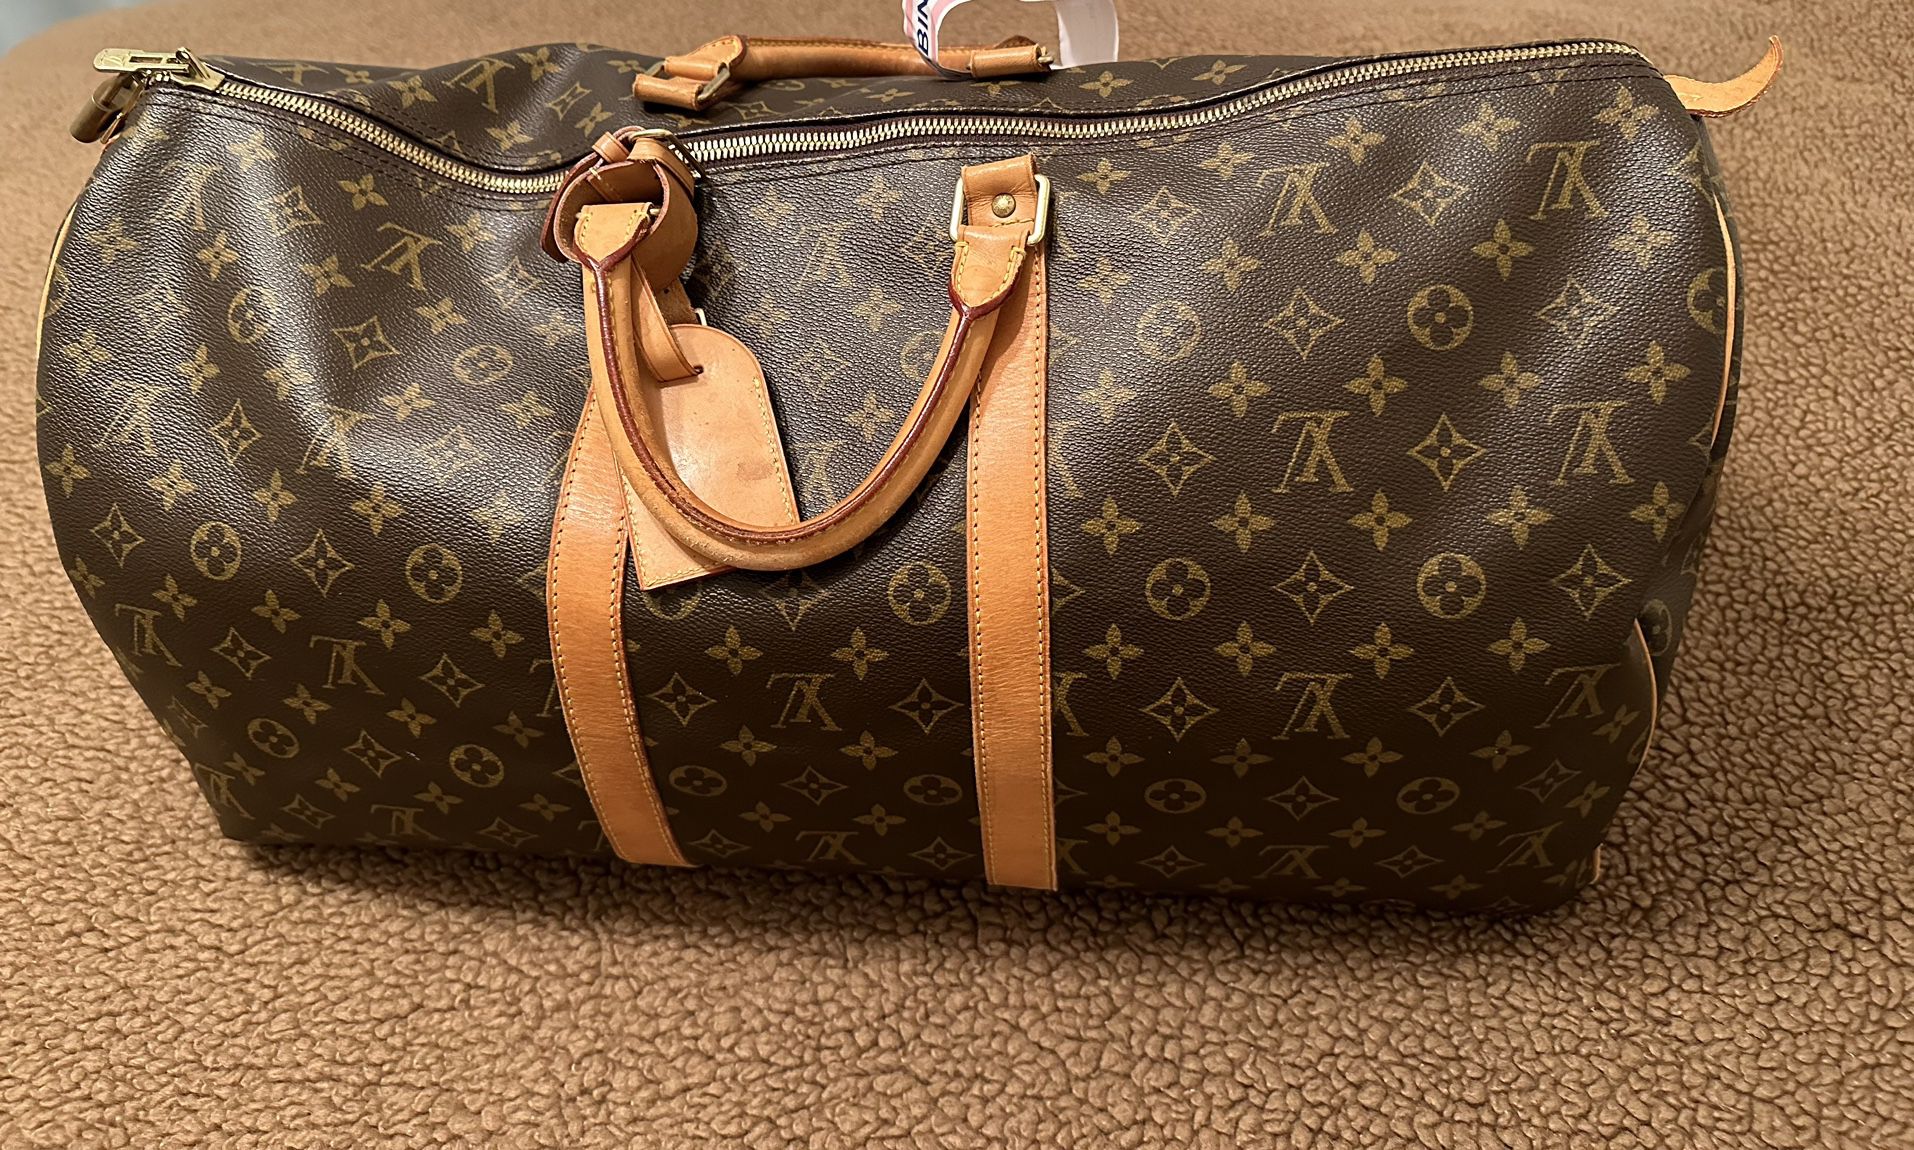 100% Authentic Louis Vuitton Keepall 55 Duffle Bag. for Sale in